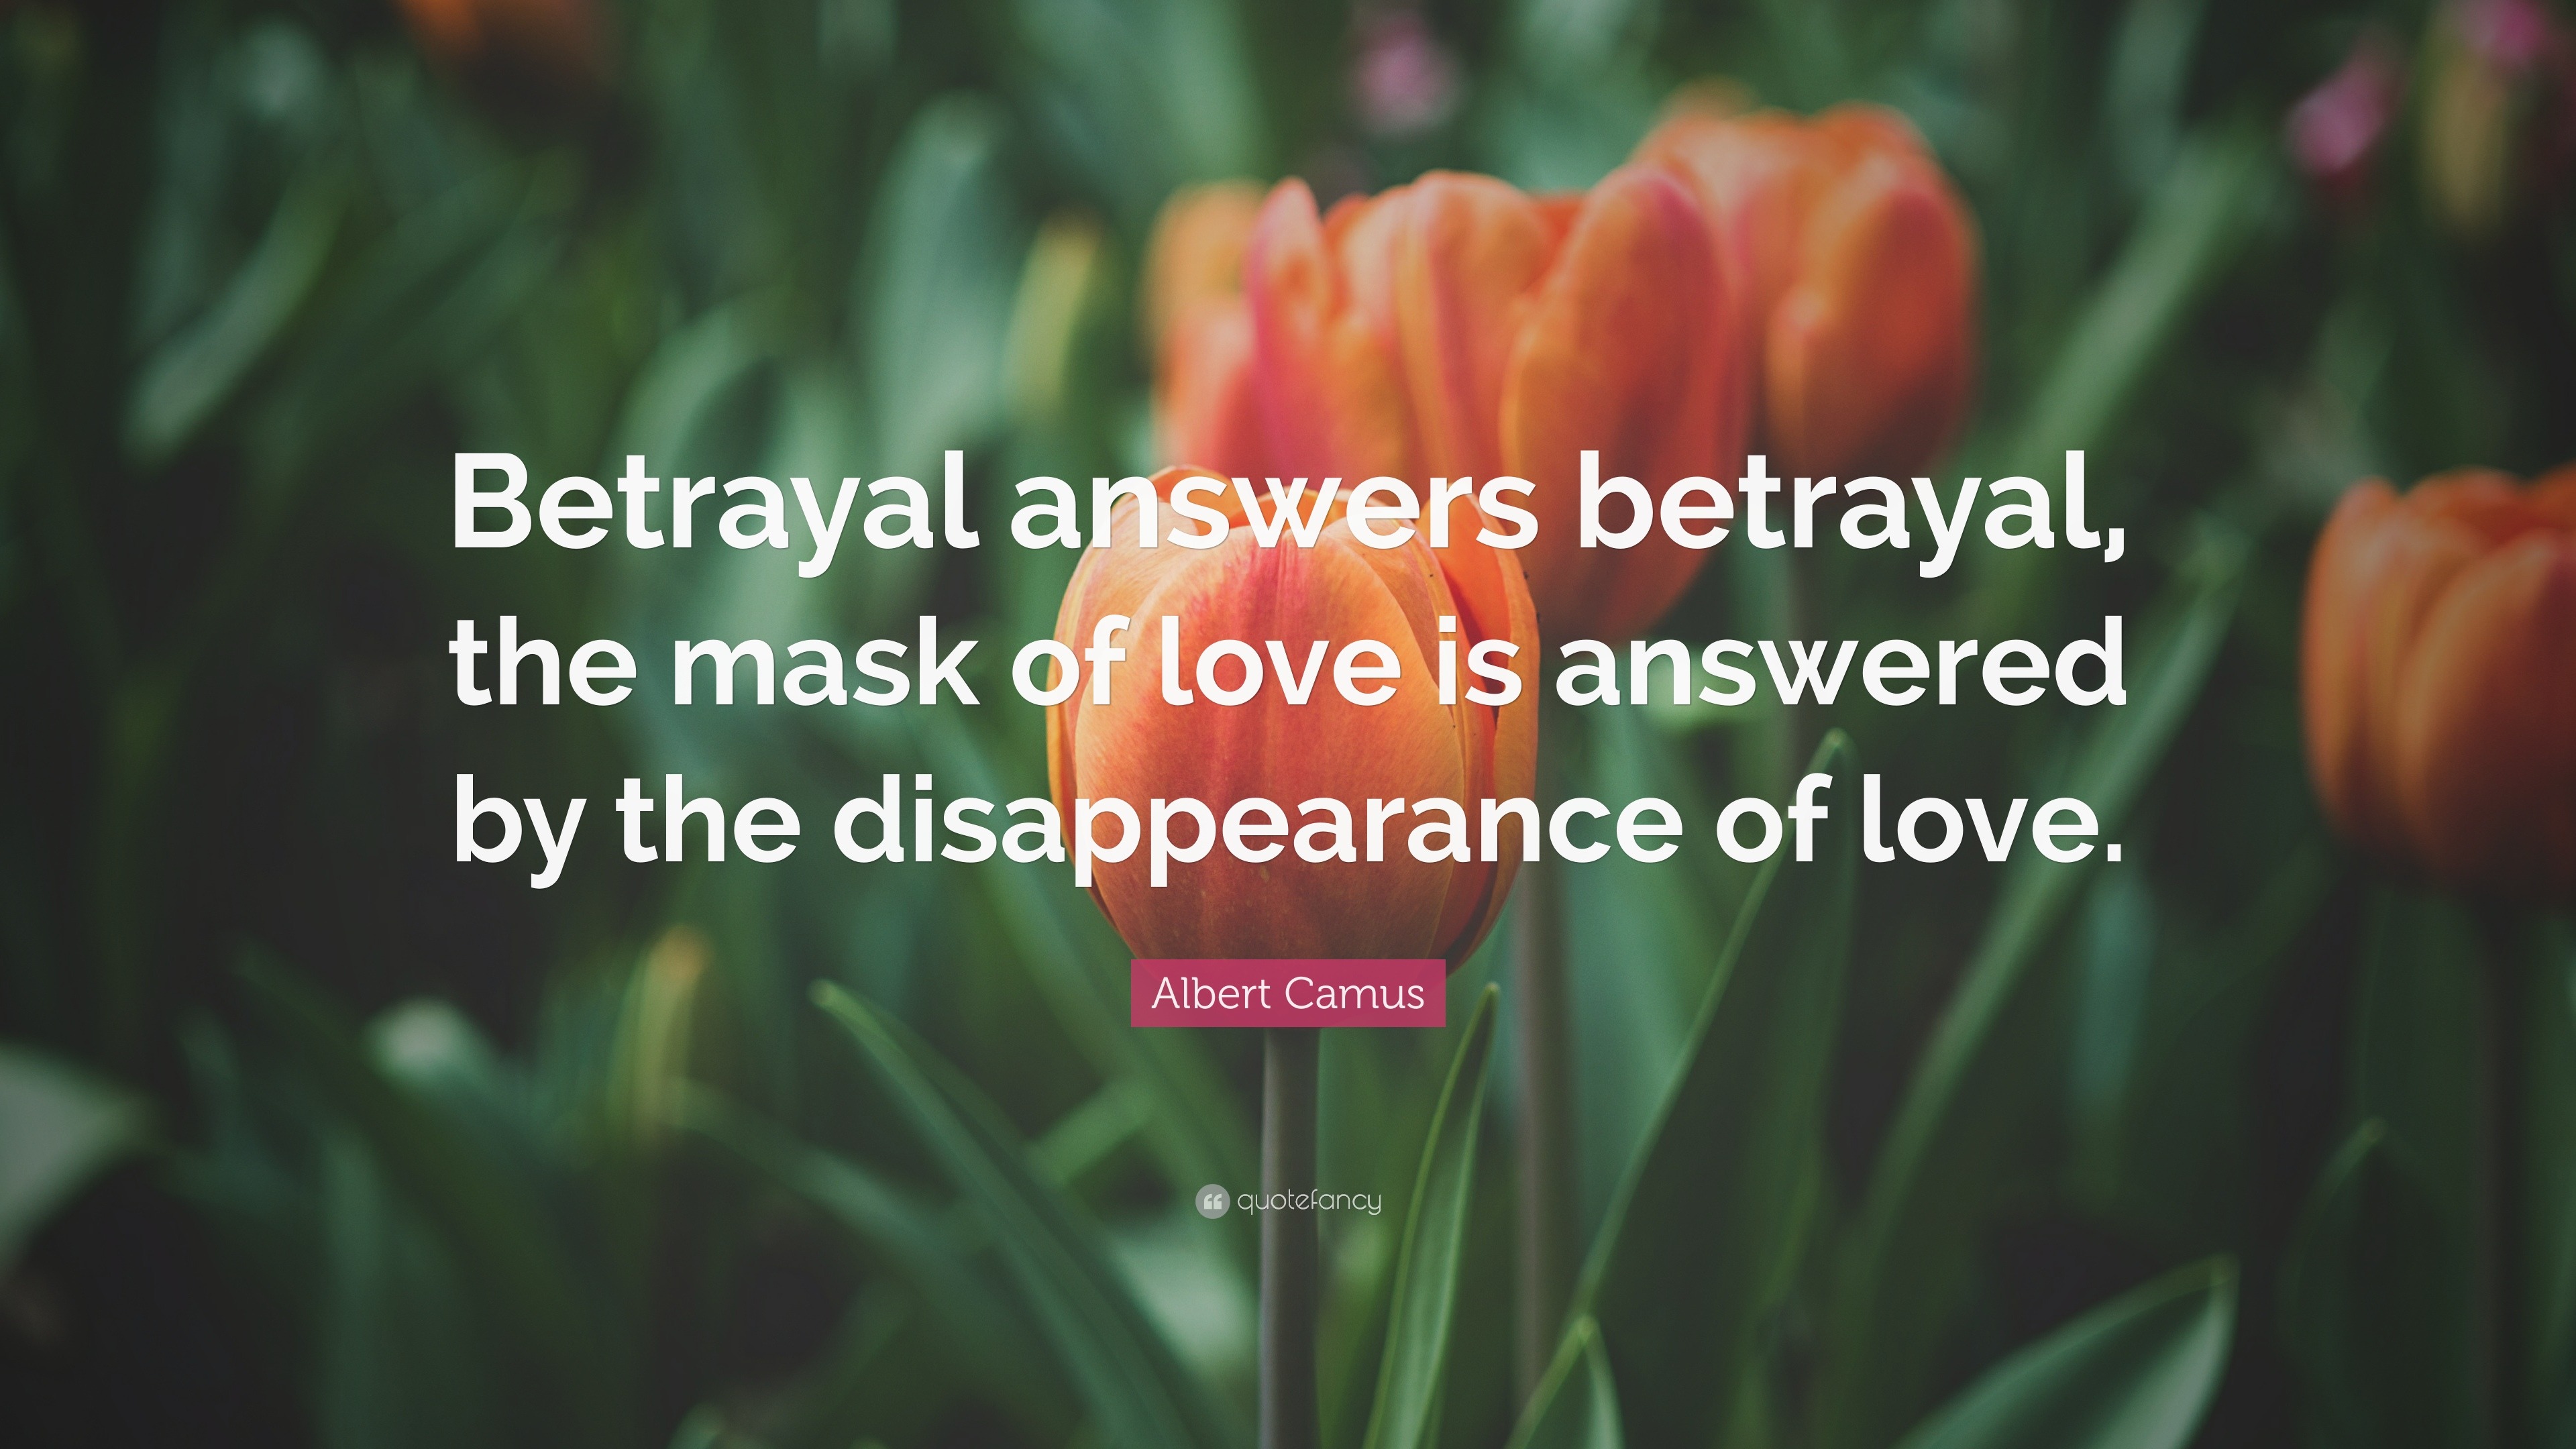 Betrayal Quotes “Betrayal answers betrayal the mask of love is answered by the